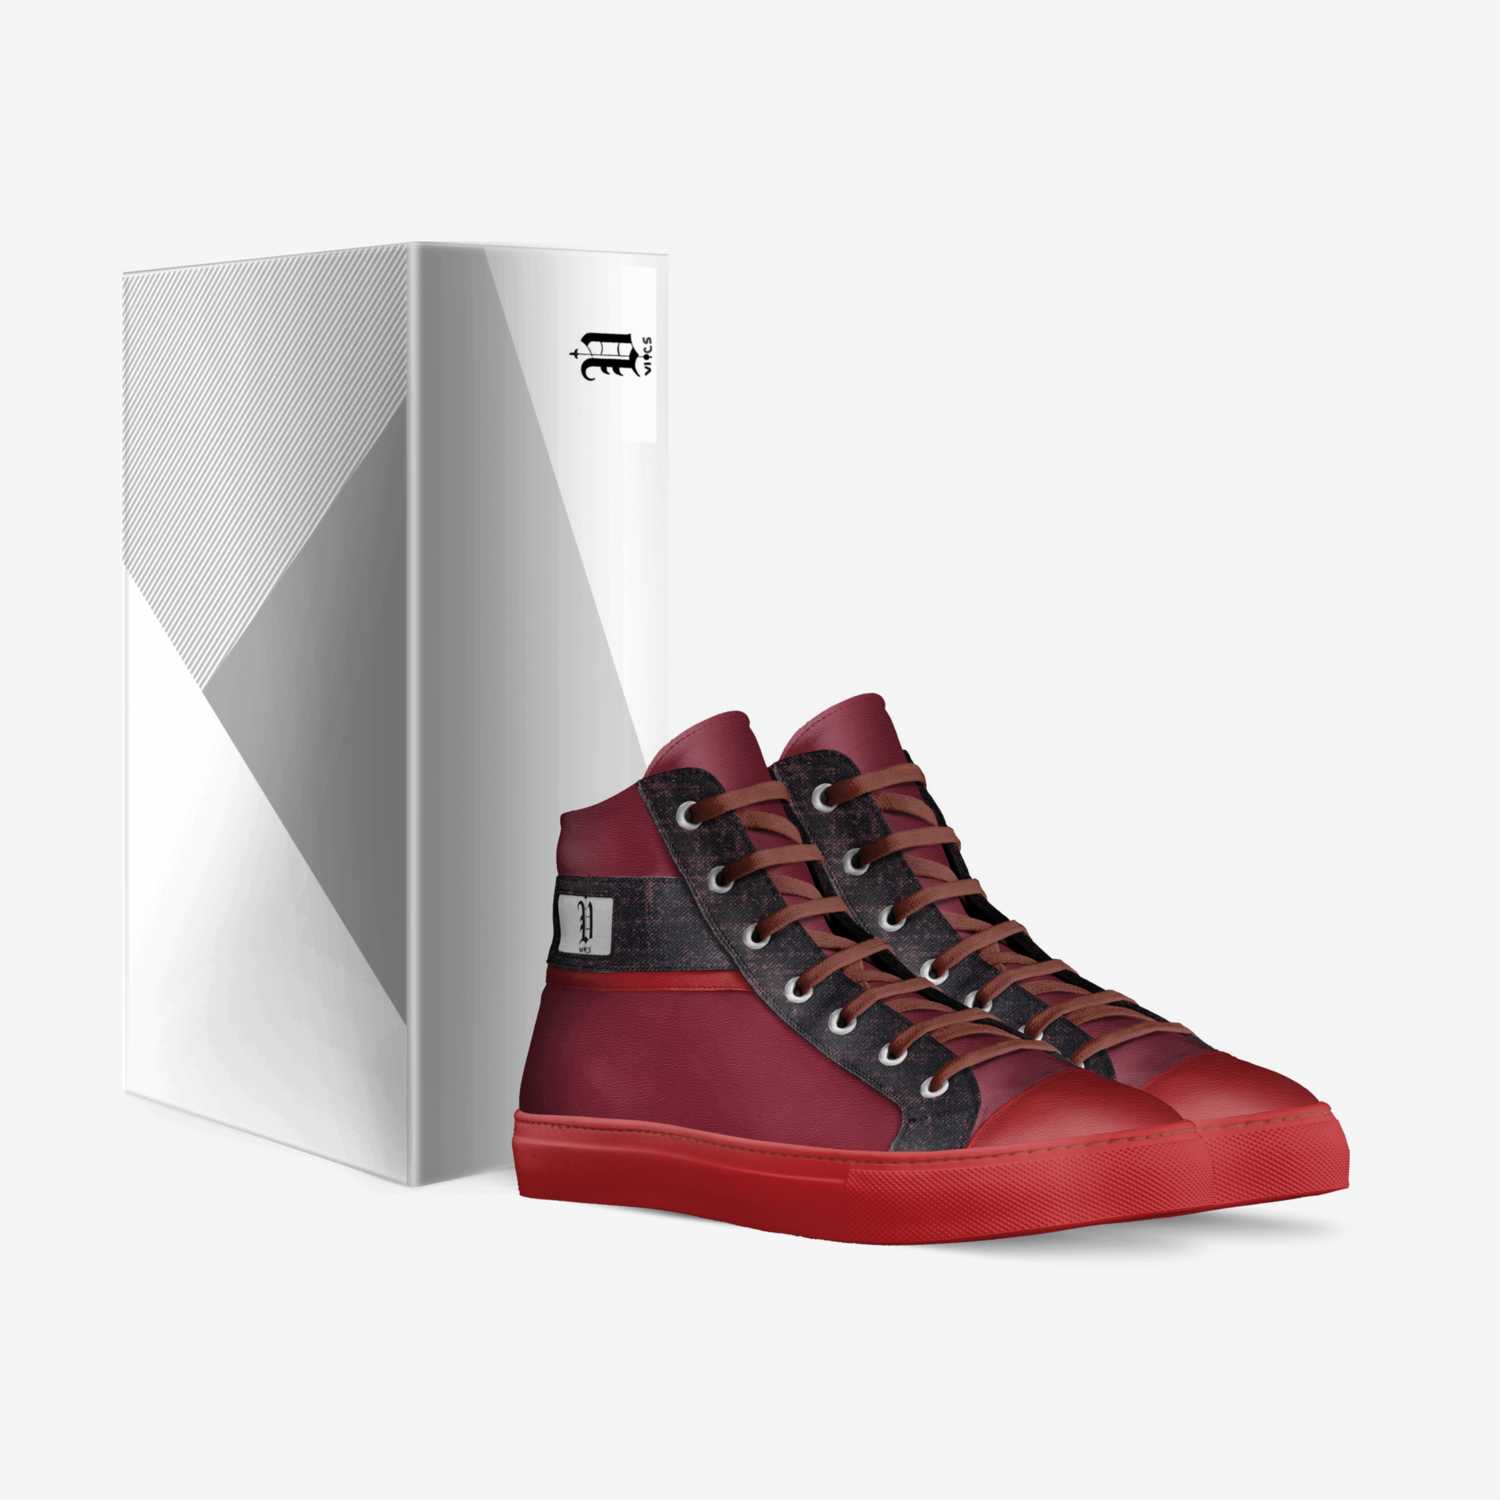 Vics s series custom made in Italy shoes by Brayden Murphy | Box view